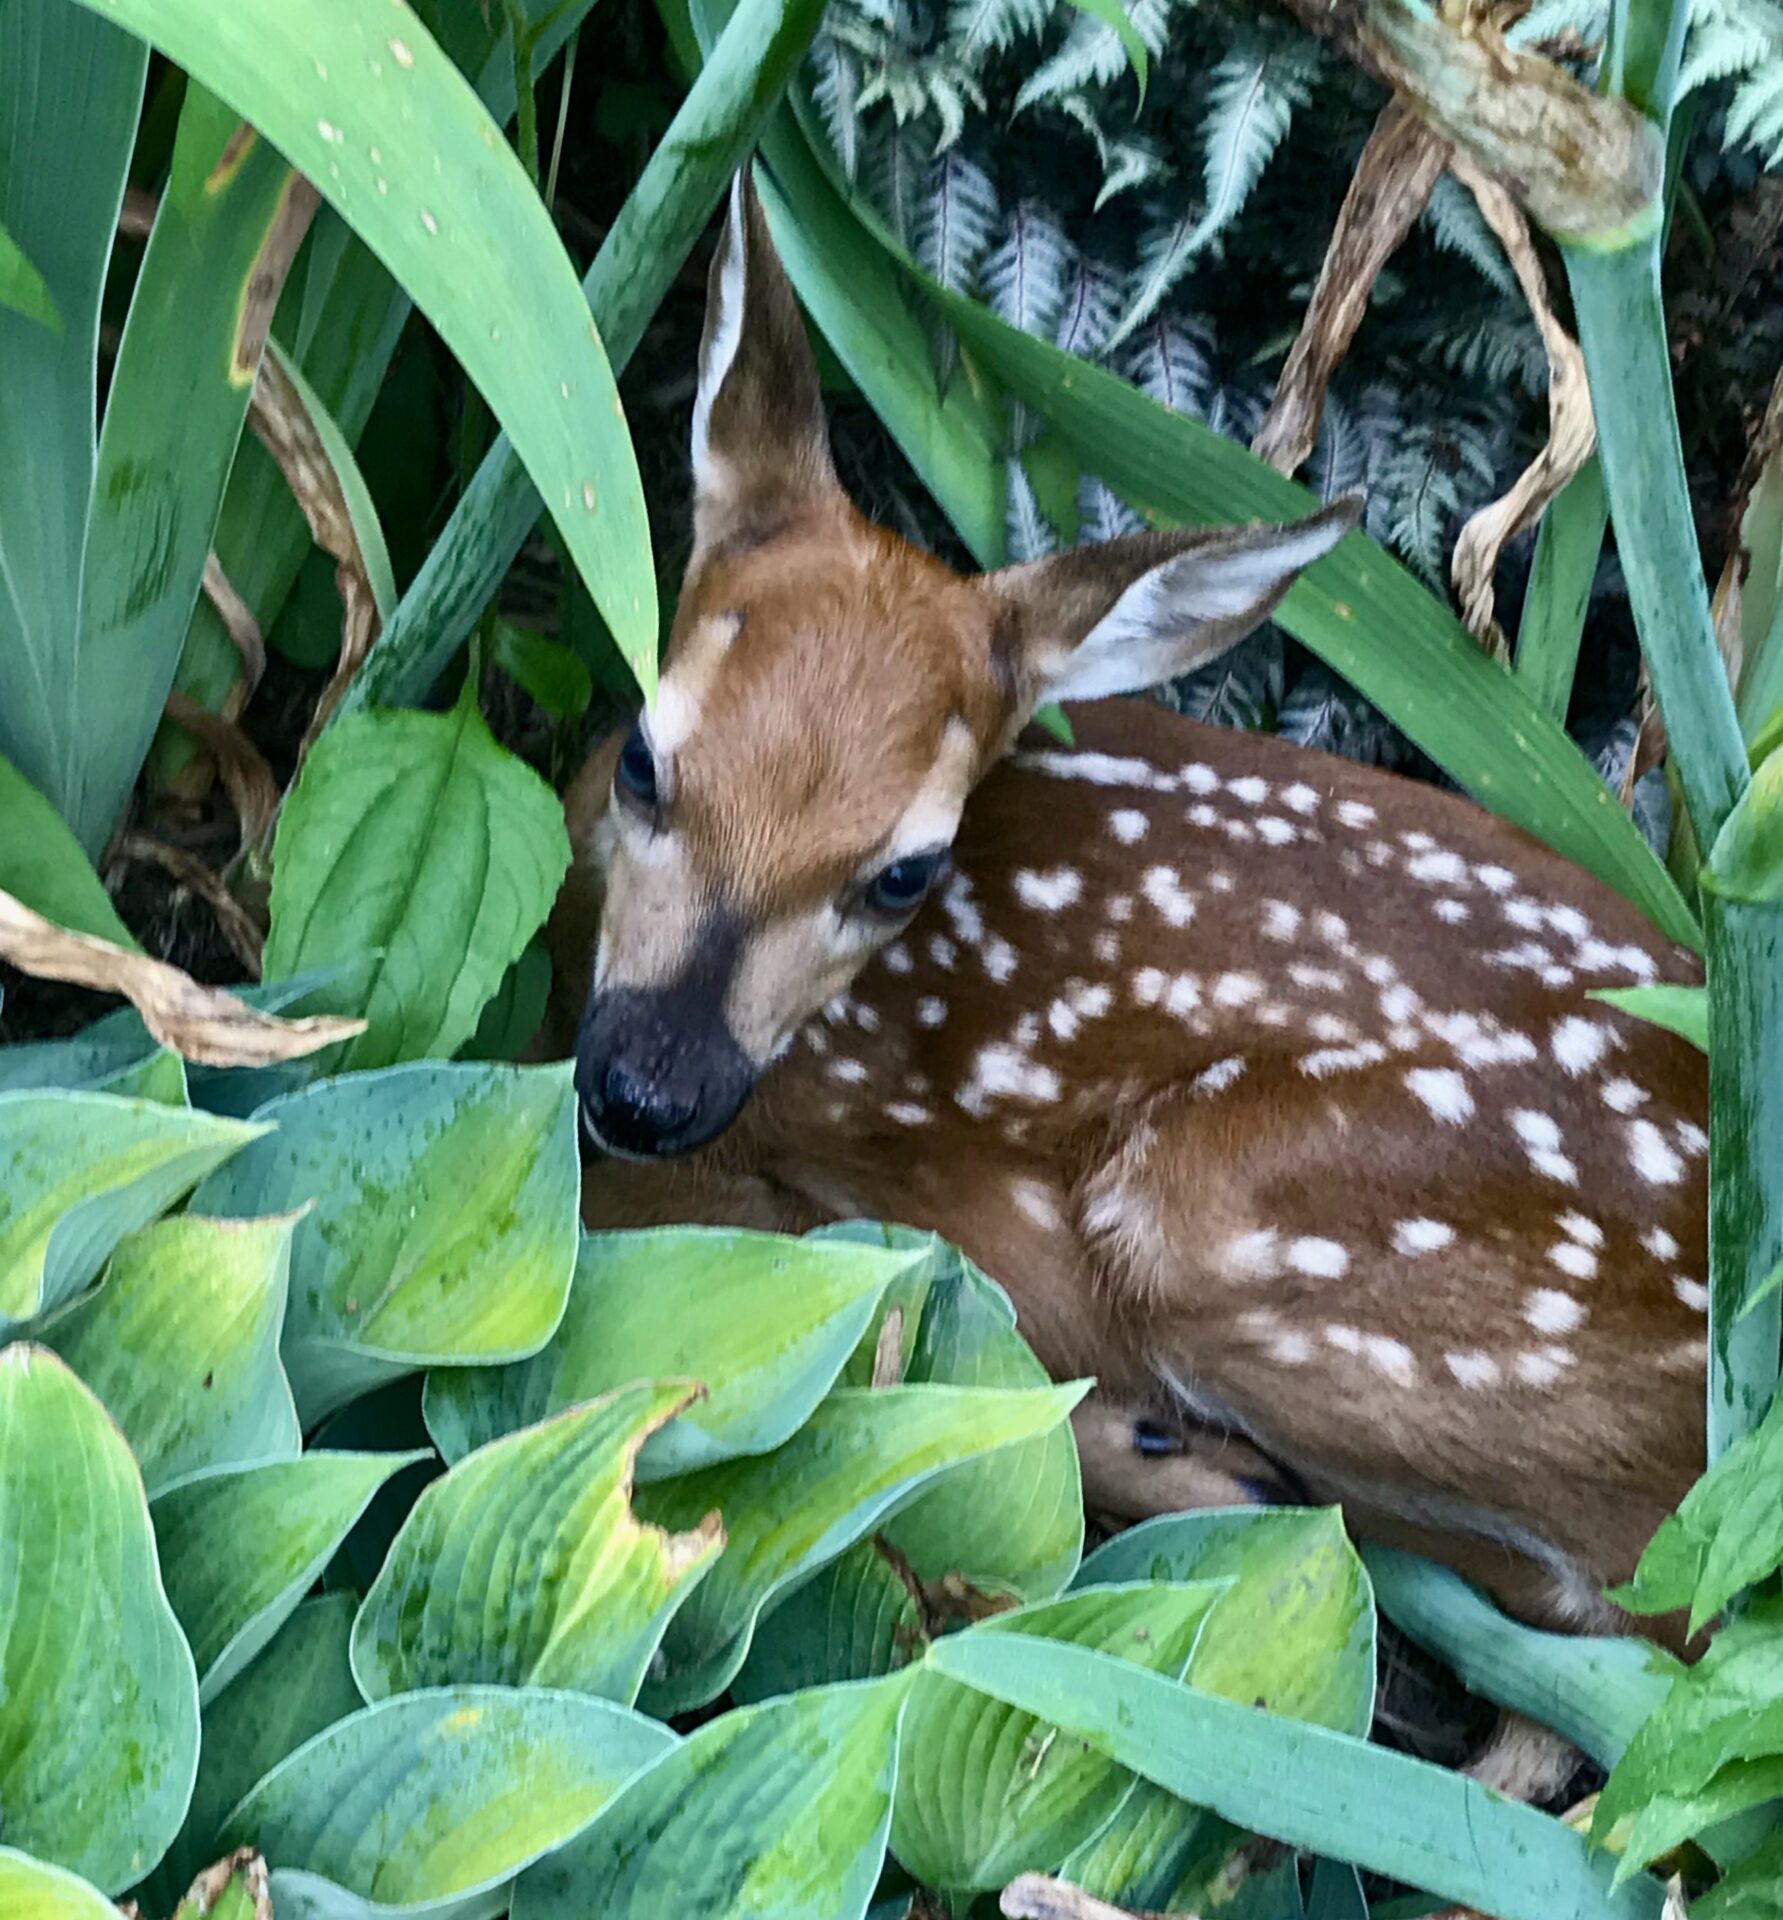 A deer surrounded by plants